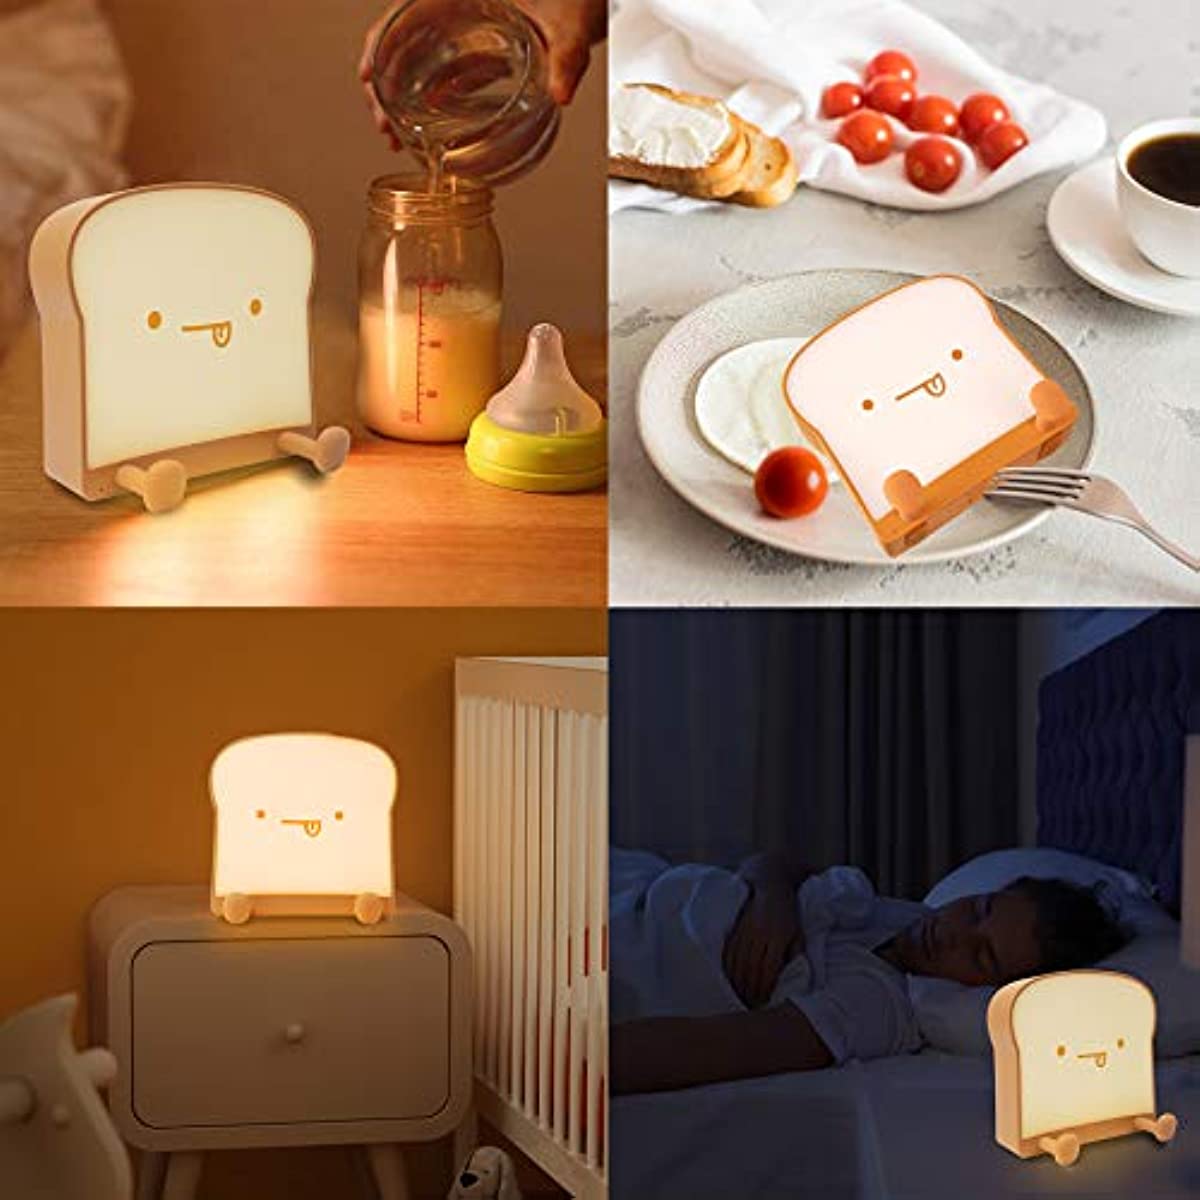 Bread Toast Lamp Cute Dorm Room Decor Night Light with Timer,Cute Bread led  Portable and Rechargeable Bedroom Bedside Sleep Lamp，Desk Lamp for Kids